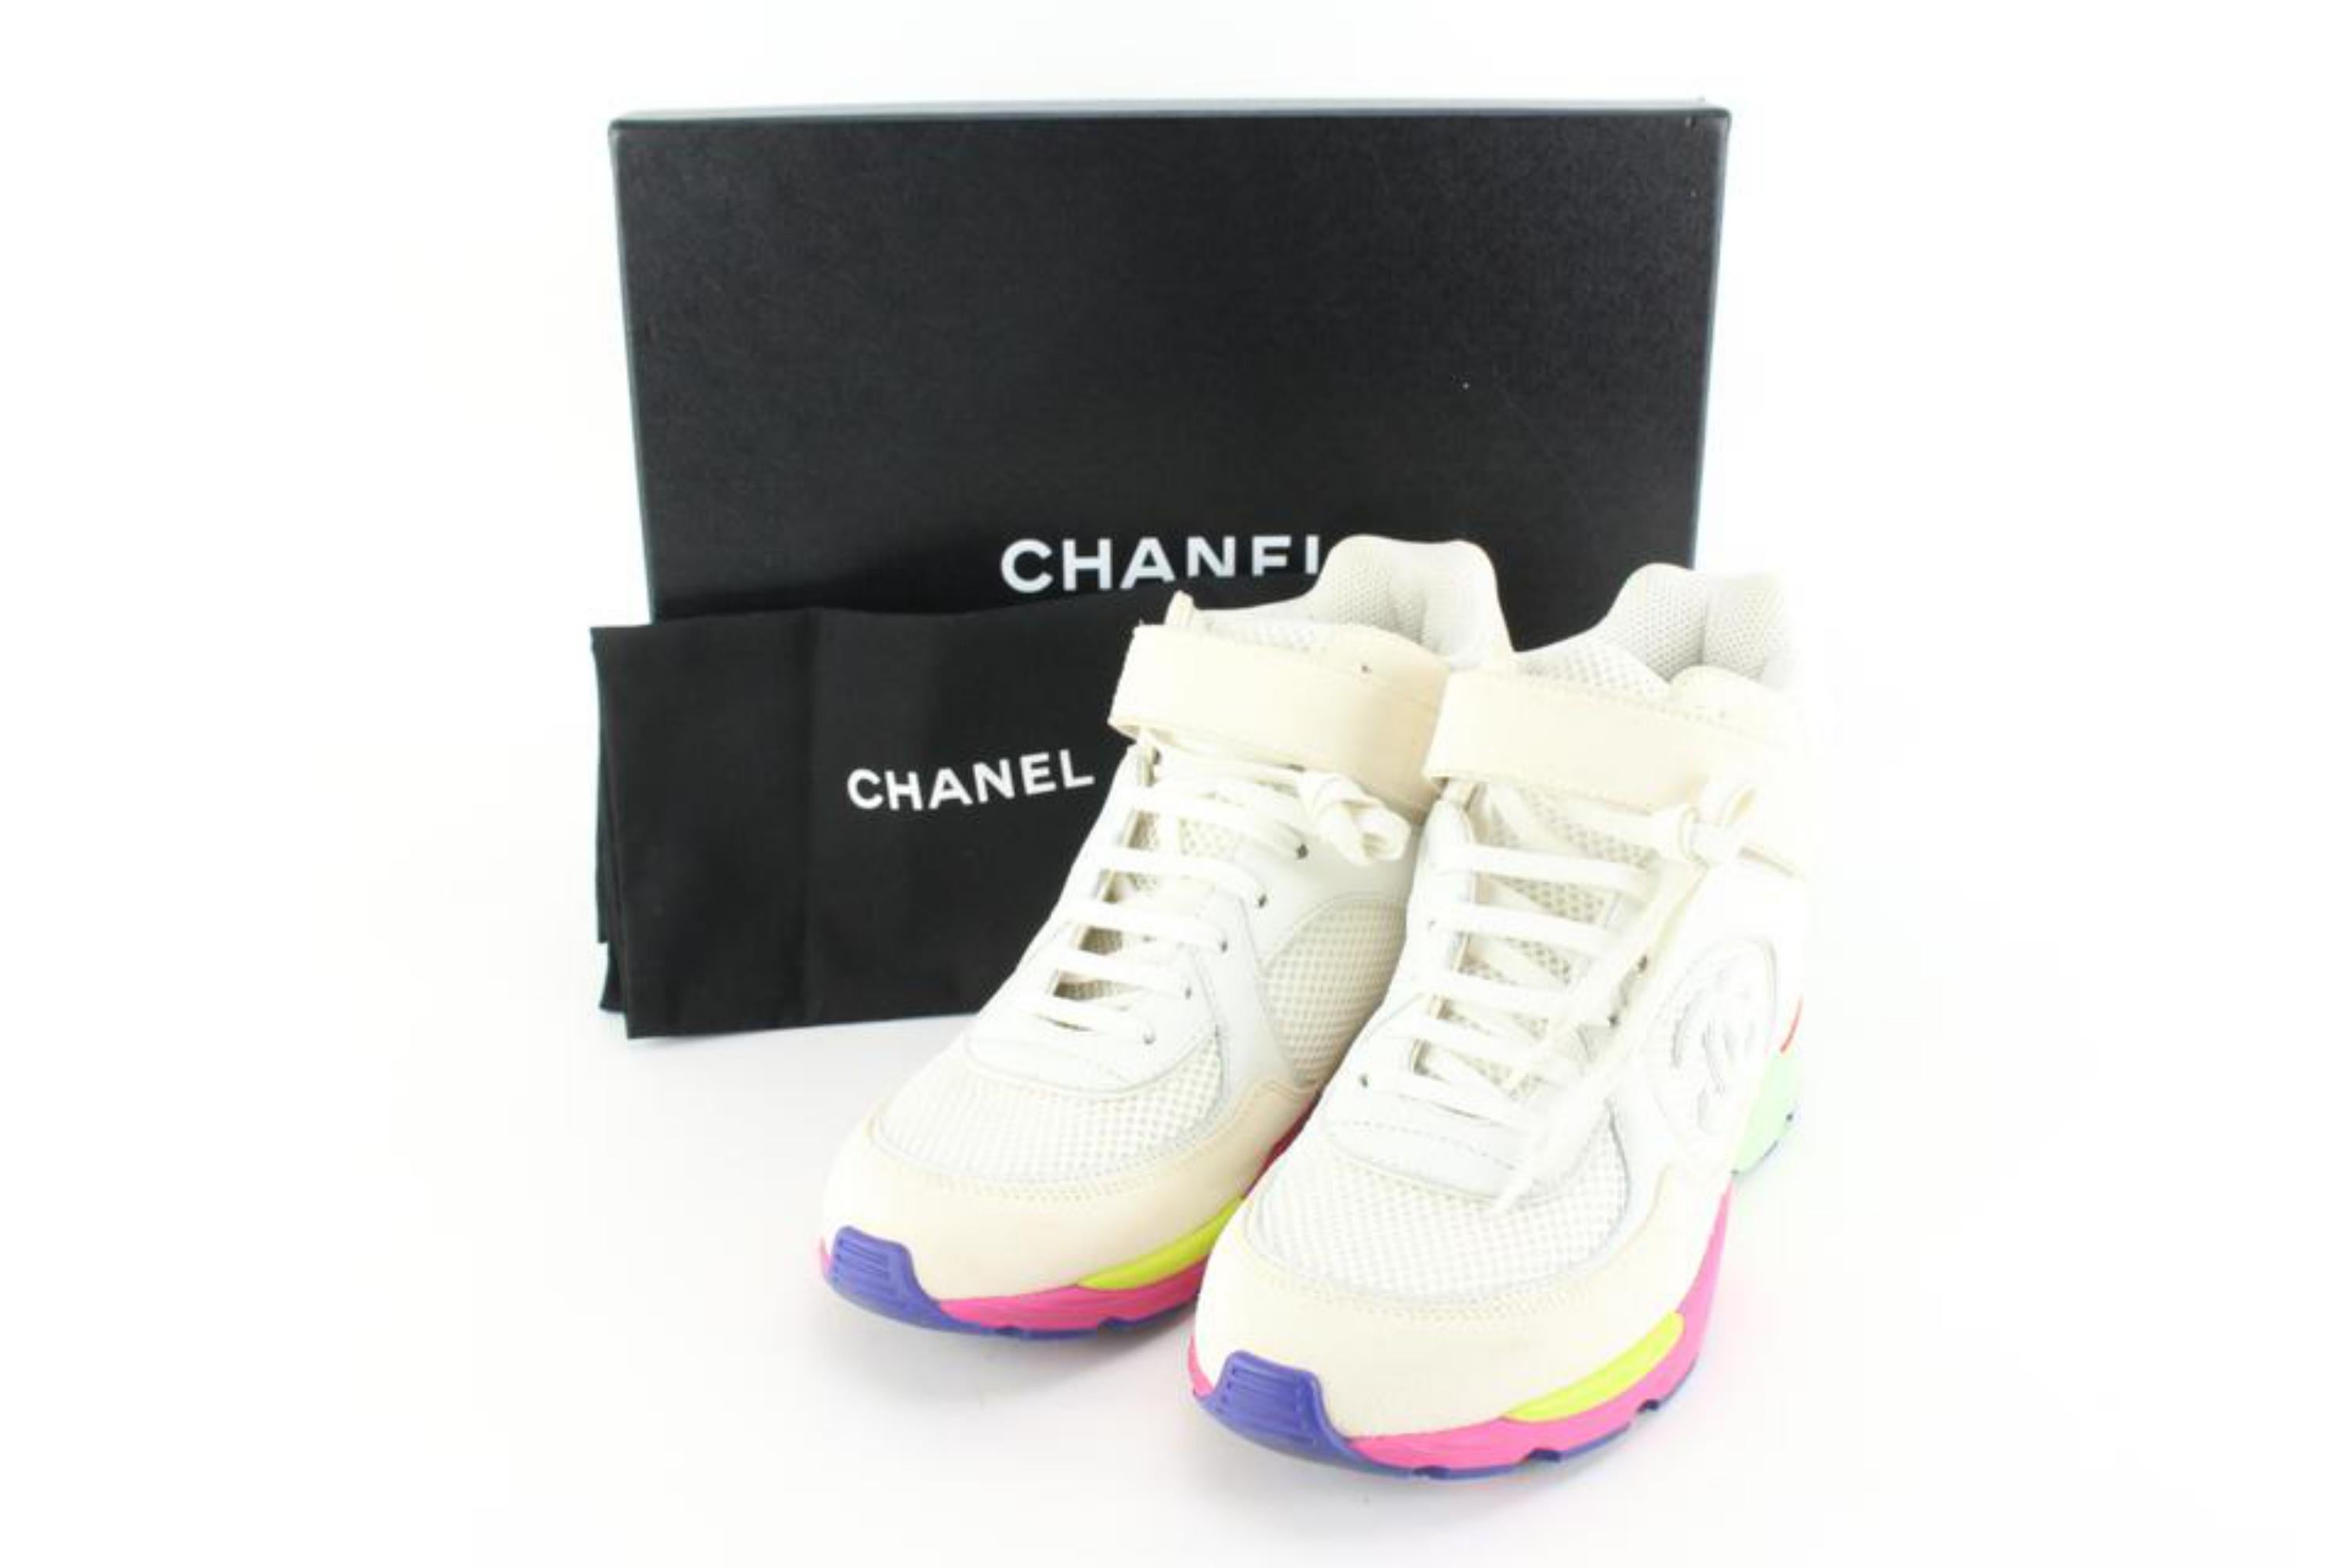 Chanel G26584 Women's 37 Multicolor High Top Trainer Sneakers 34cc721s 5